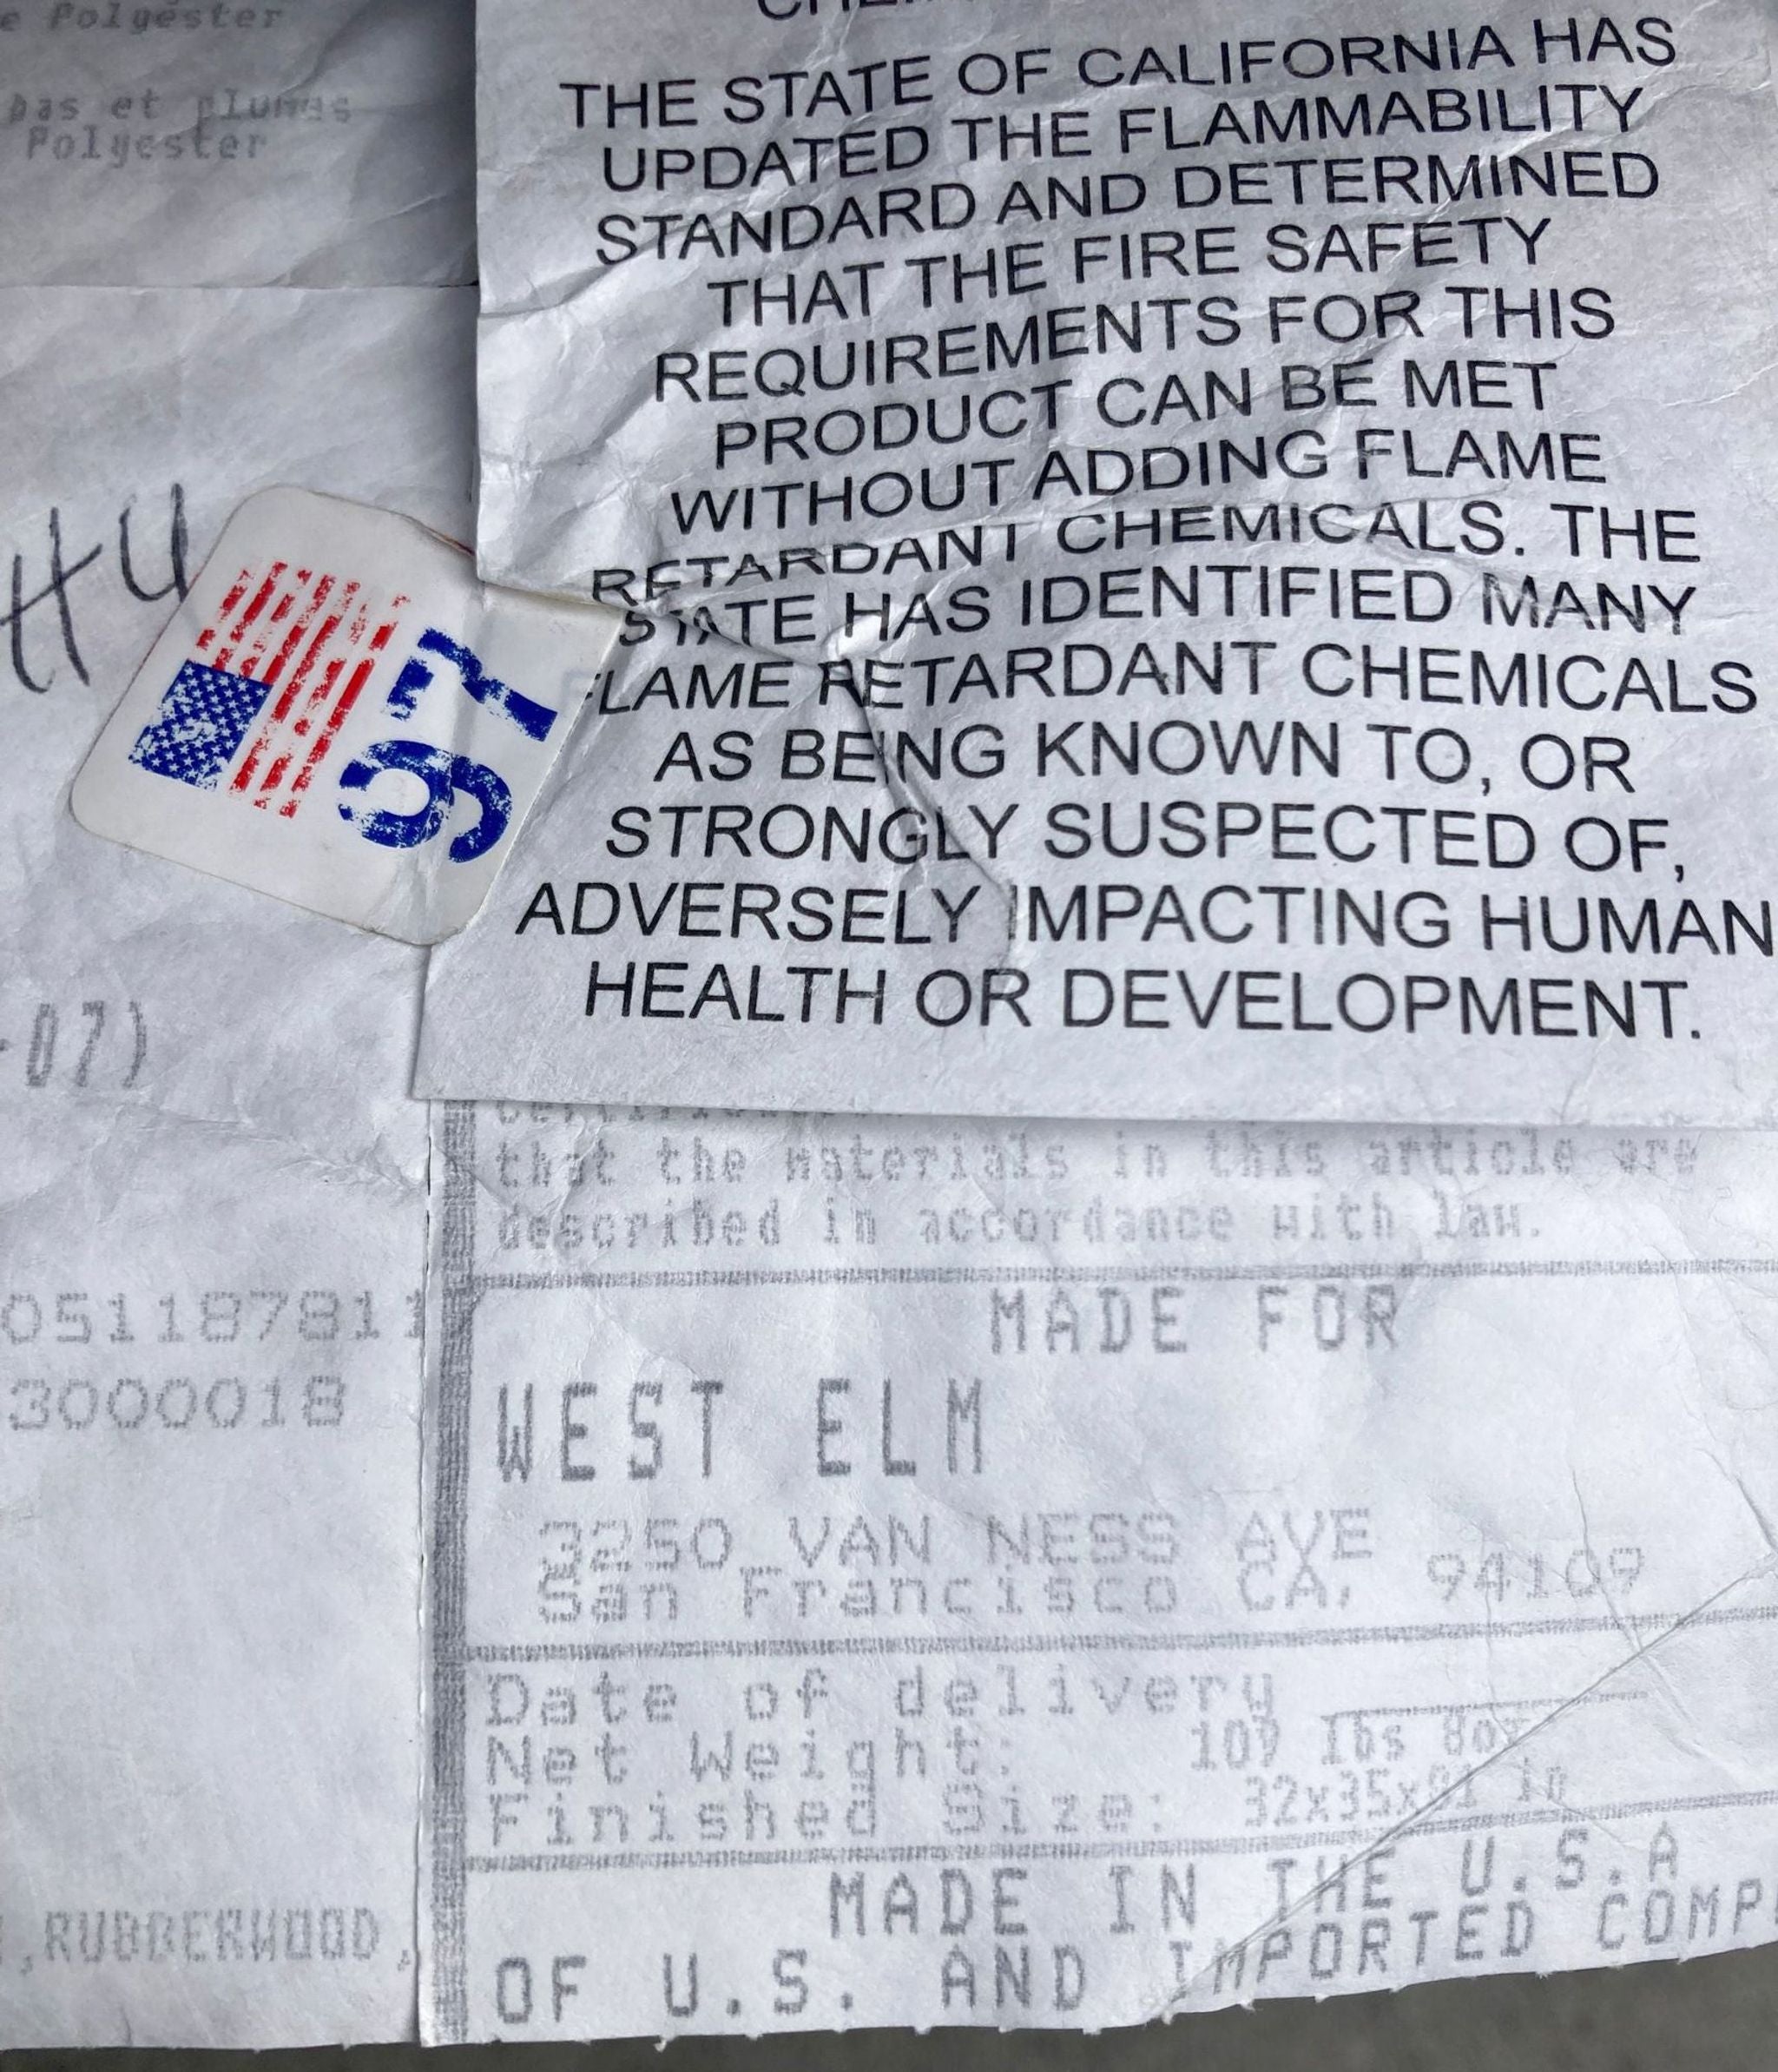 Torn label with text regarding California's flammability standard, warning about flame retardant chemicals, and brand details for West Elm's Hamilton Sofa.